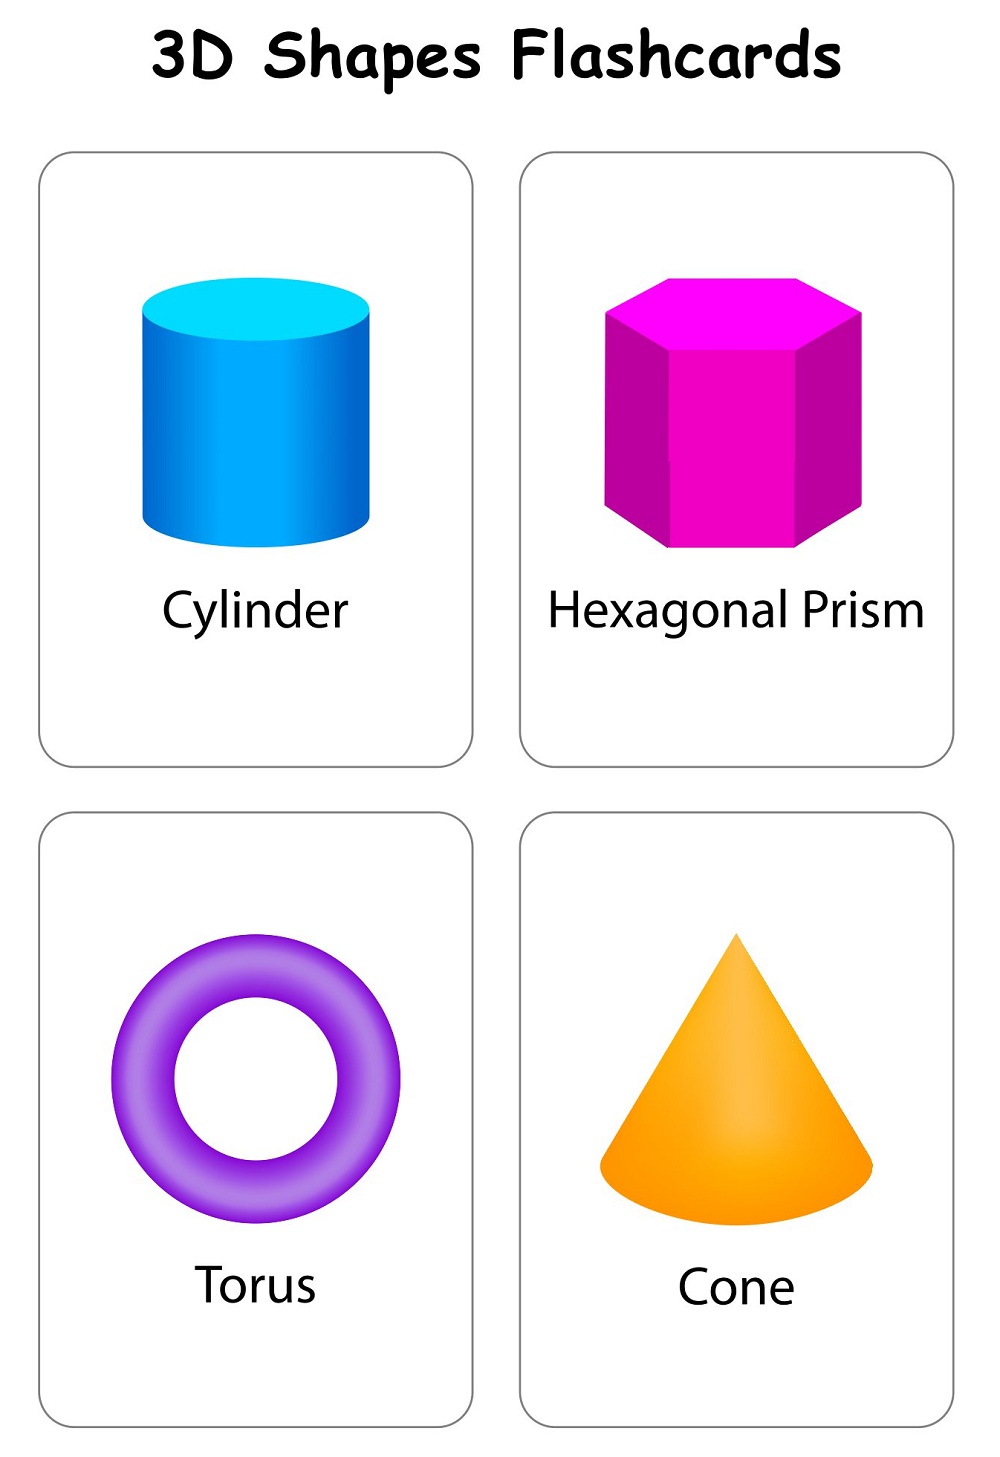 3D Shapes Flashcards